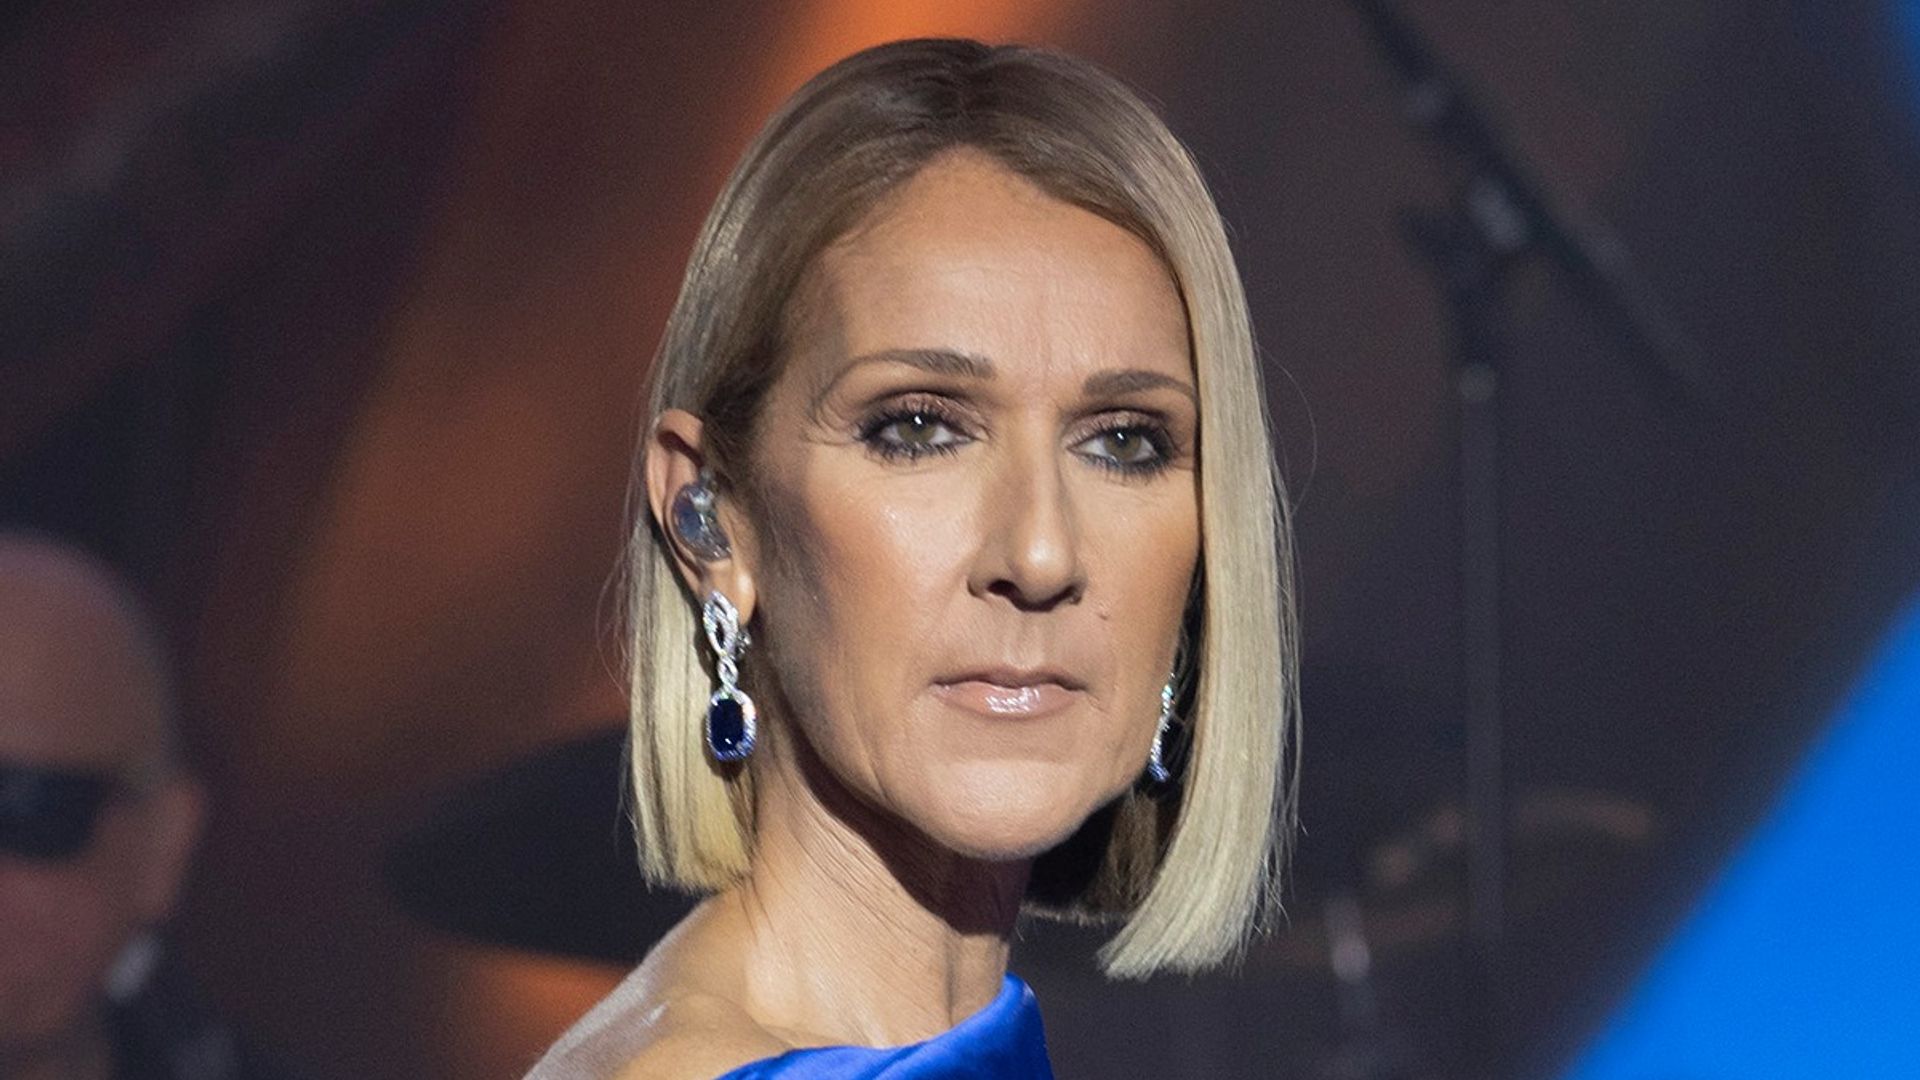 Celine Dion honors late husband with heartbreaking message